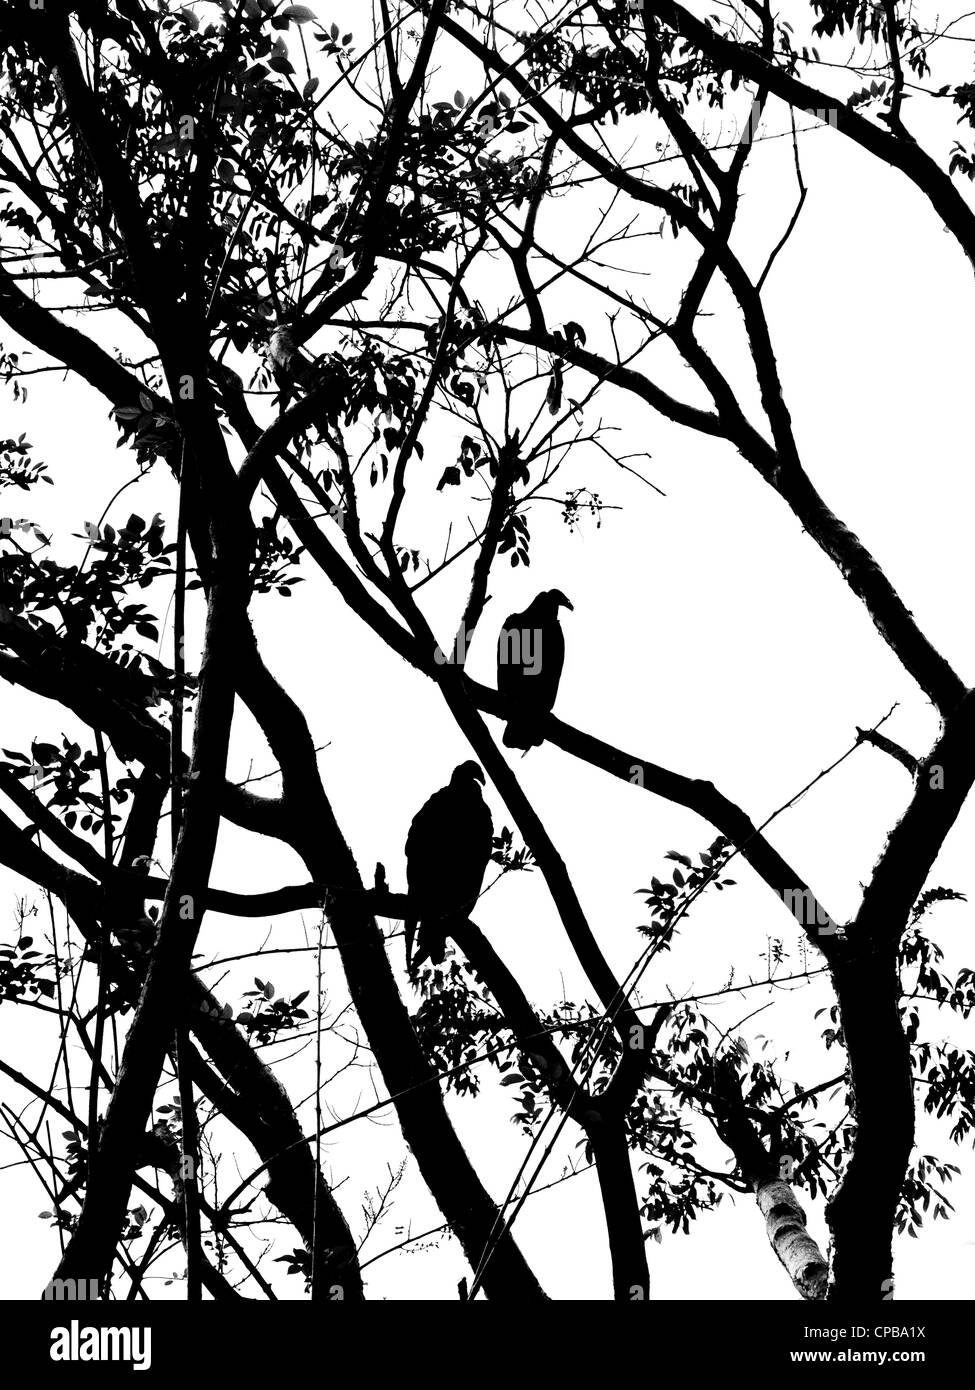 Silhouettes of two large vultures roosting in a tree against a clear white sky in Pinar del Rio Province, Cuba. Stock Photo